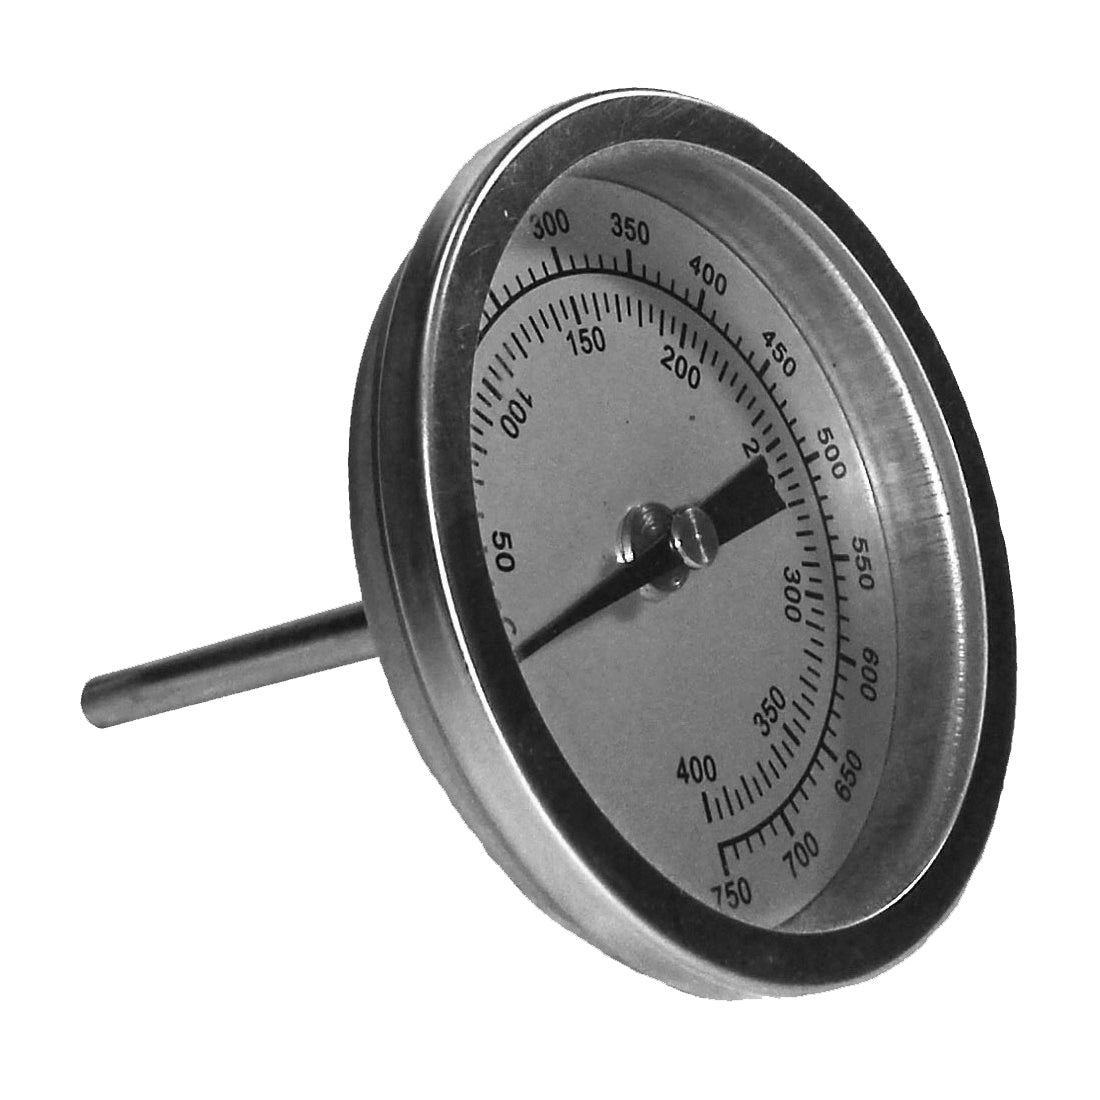 https://cdn.shopify.com/s/files/1/0583/2418/9372/products/74402_Dome-Thermometer-900.jpg?v=1647456001